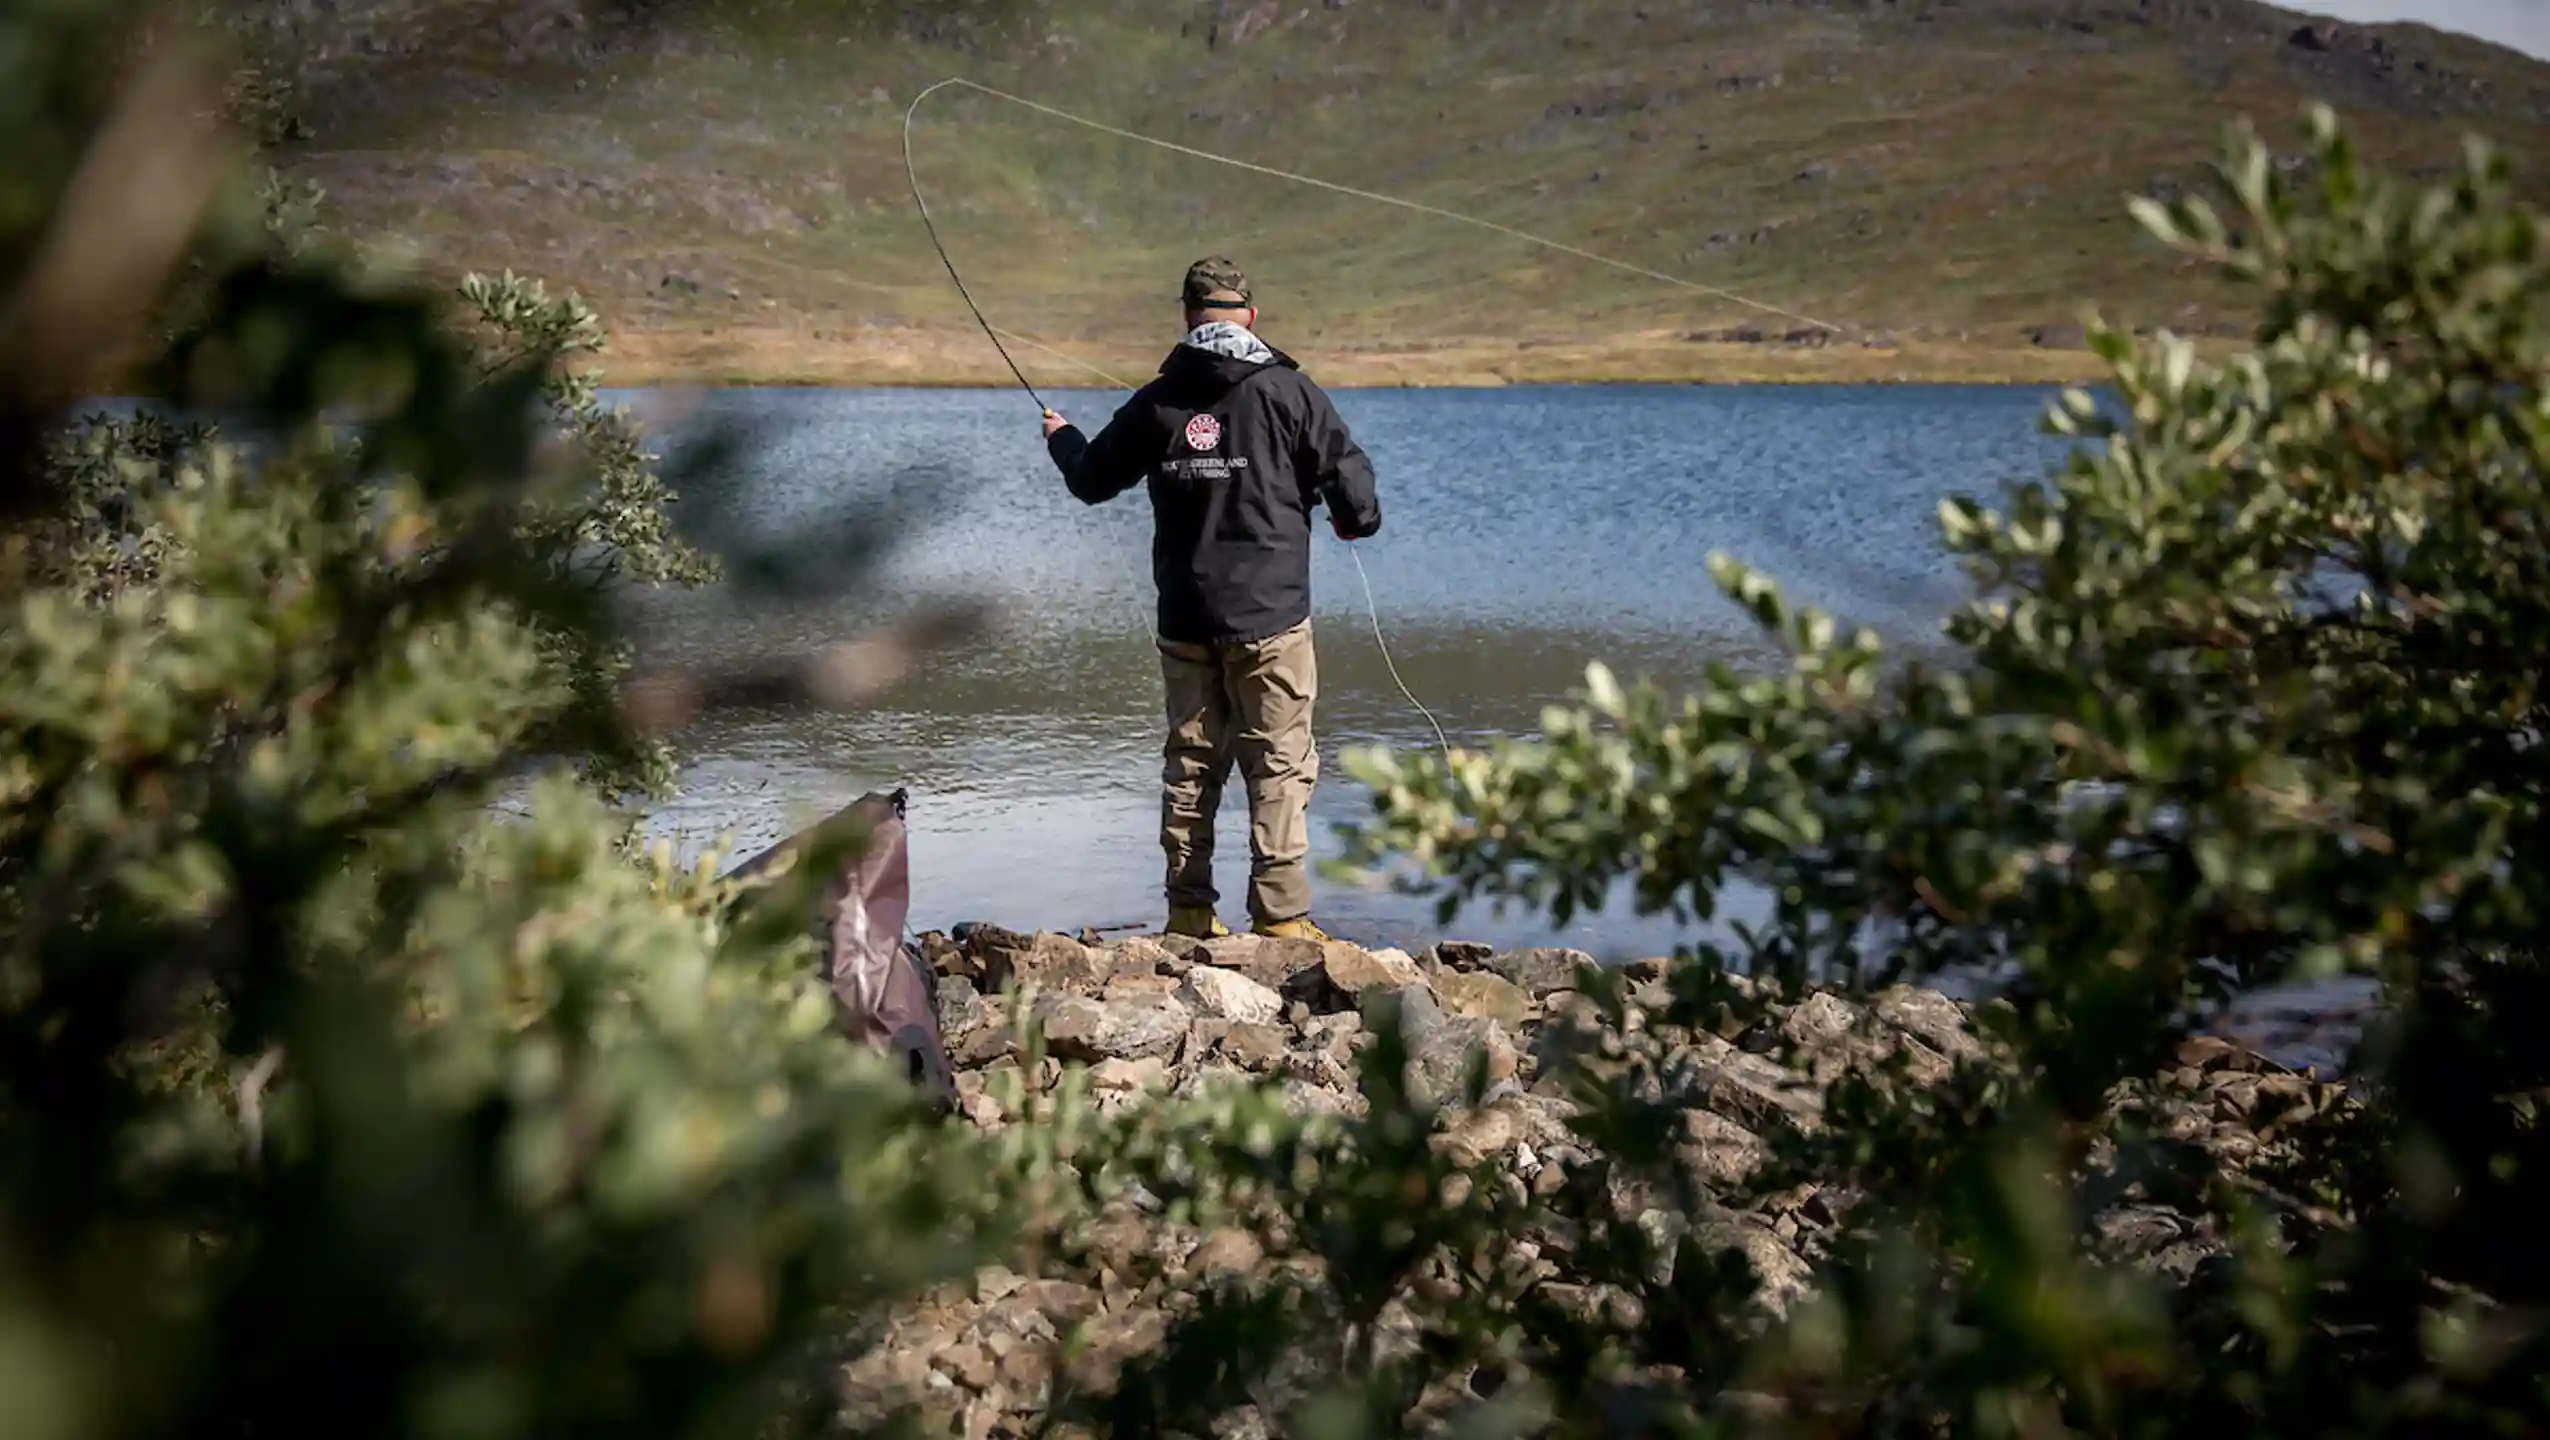 Fly Fishing For Arctic Char With The Guide From South Greenland Fly Fishing (1)